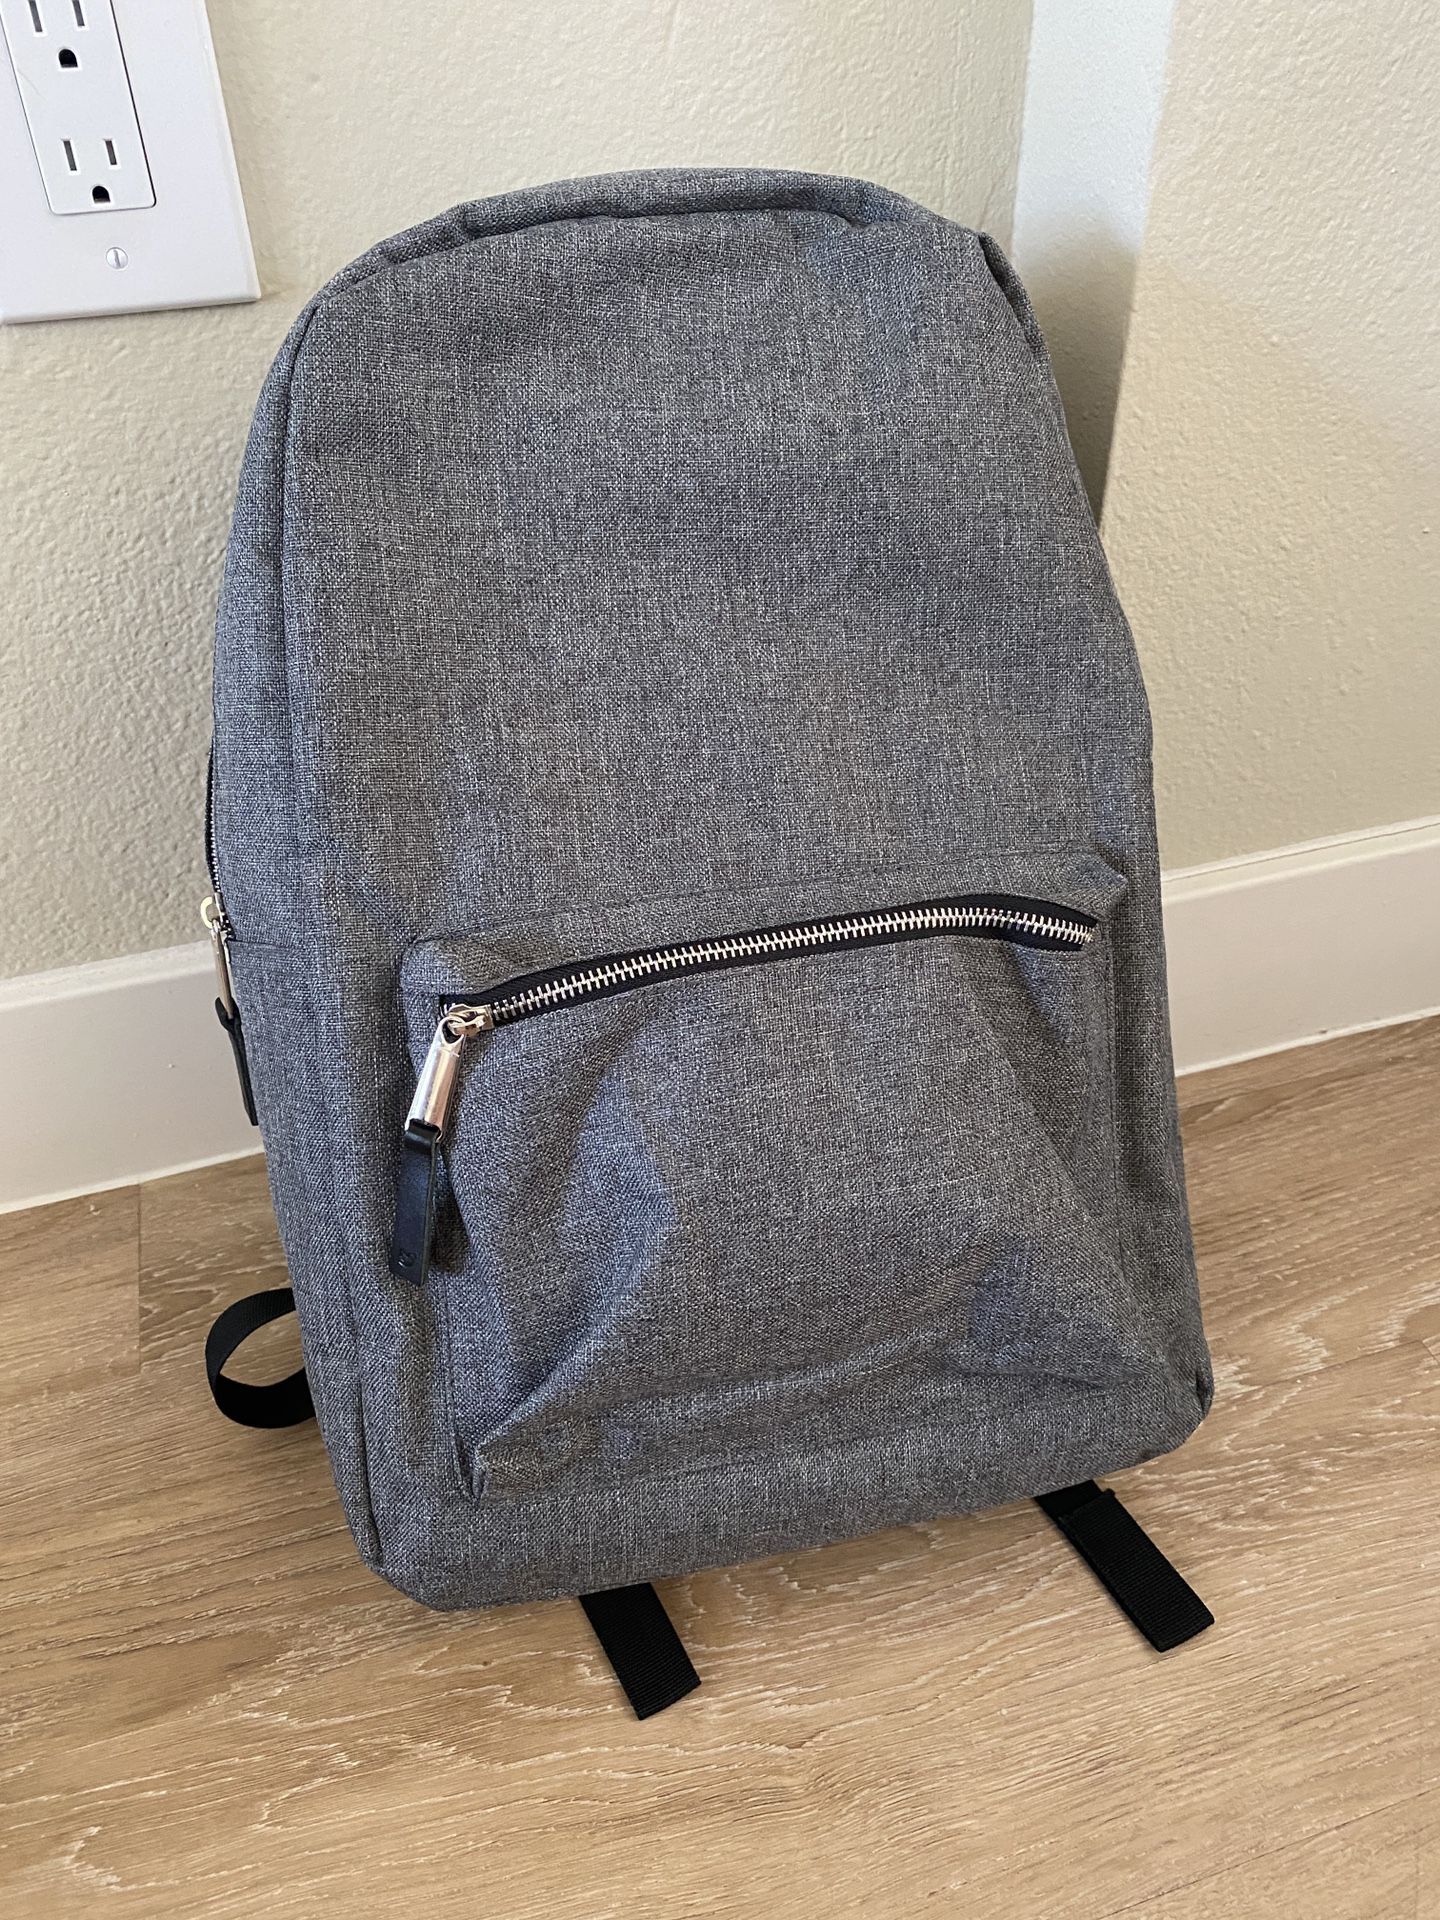 NEW laptop backpack